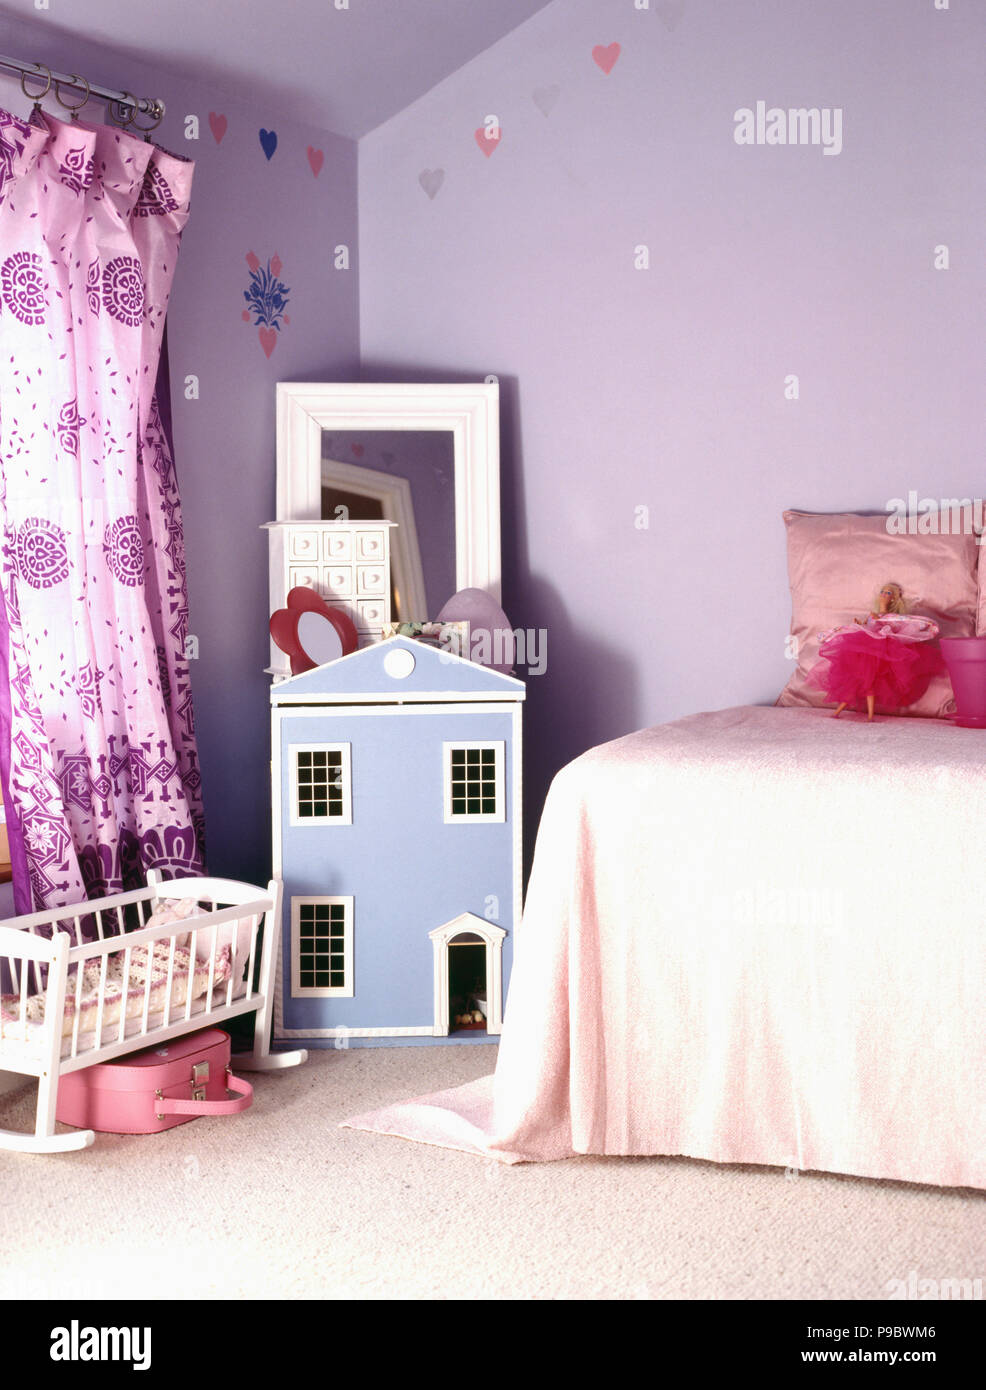 Blue dolls' house and mauve curtains in child's lilac bedroom Stock Photo